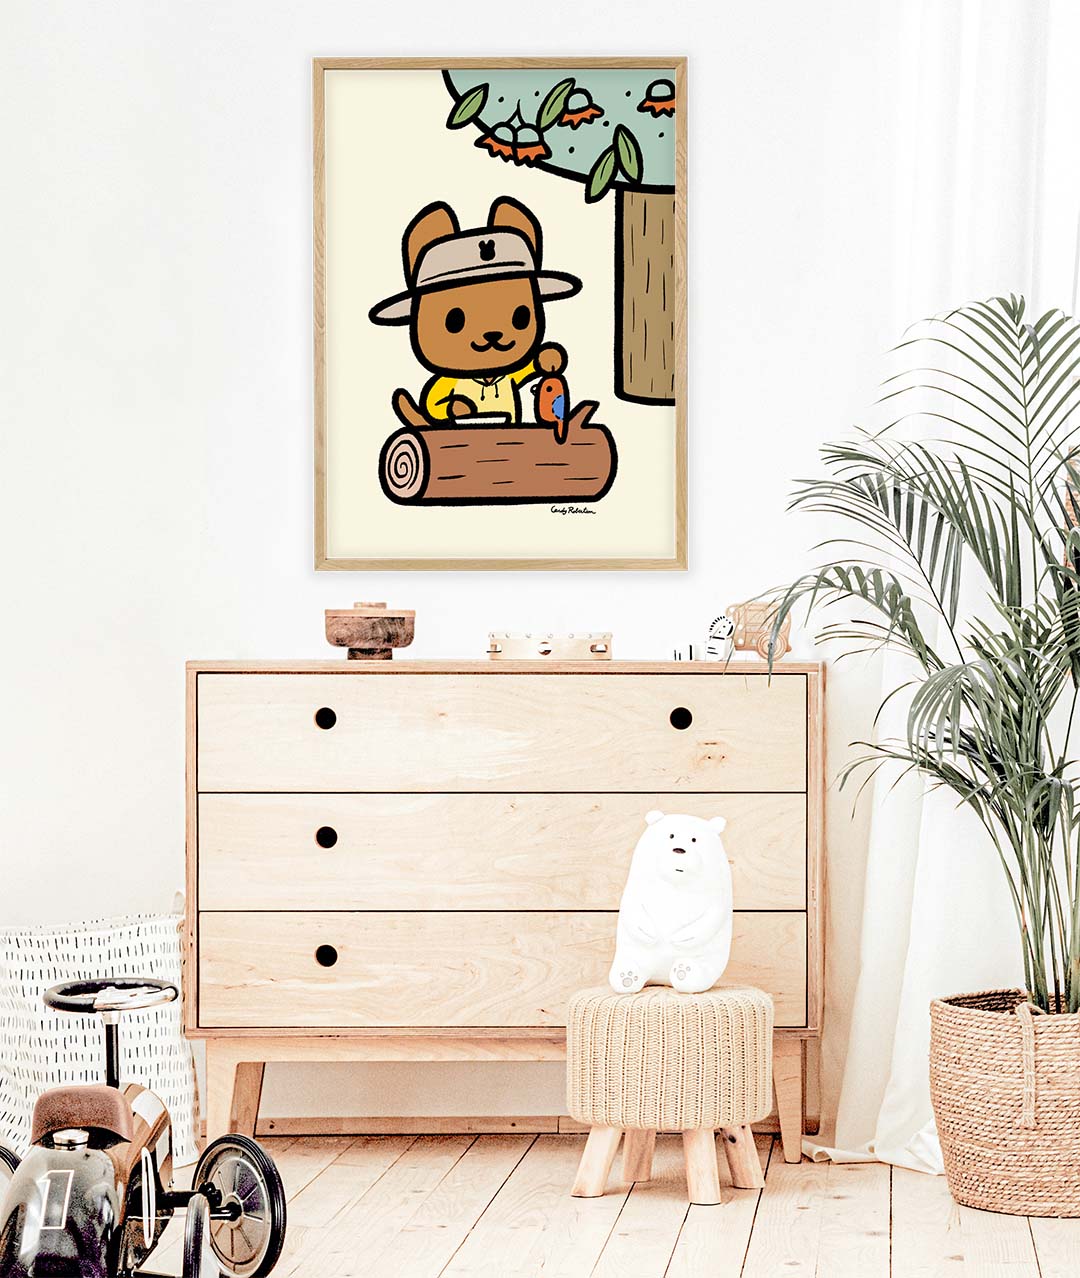 Bold Character Illustration for Modern Kids' Decor: Inspired by KAWS and Pop Art